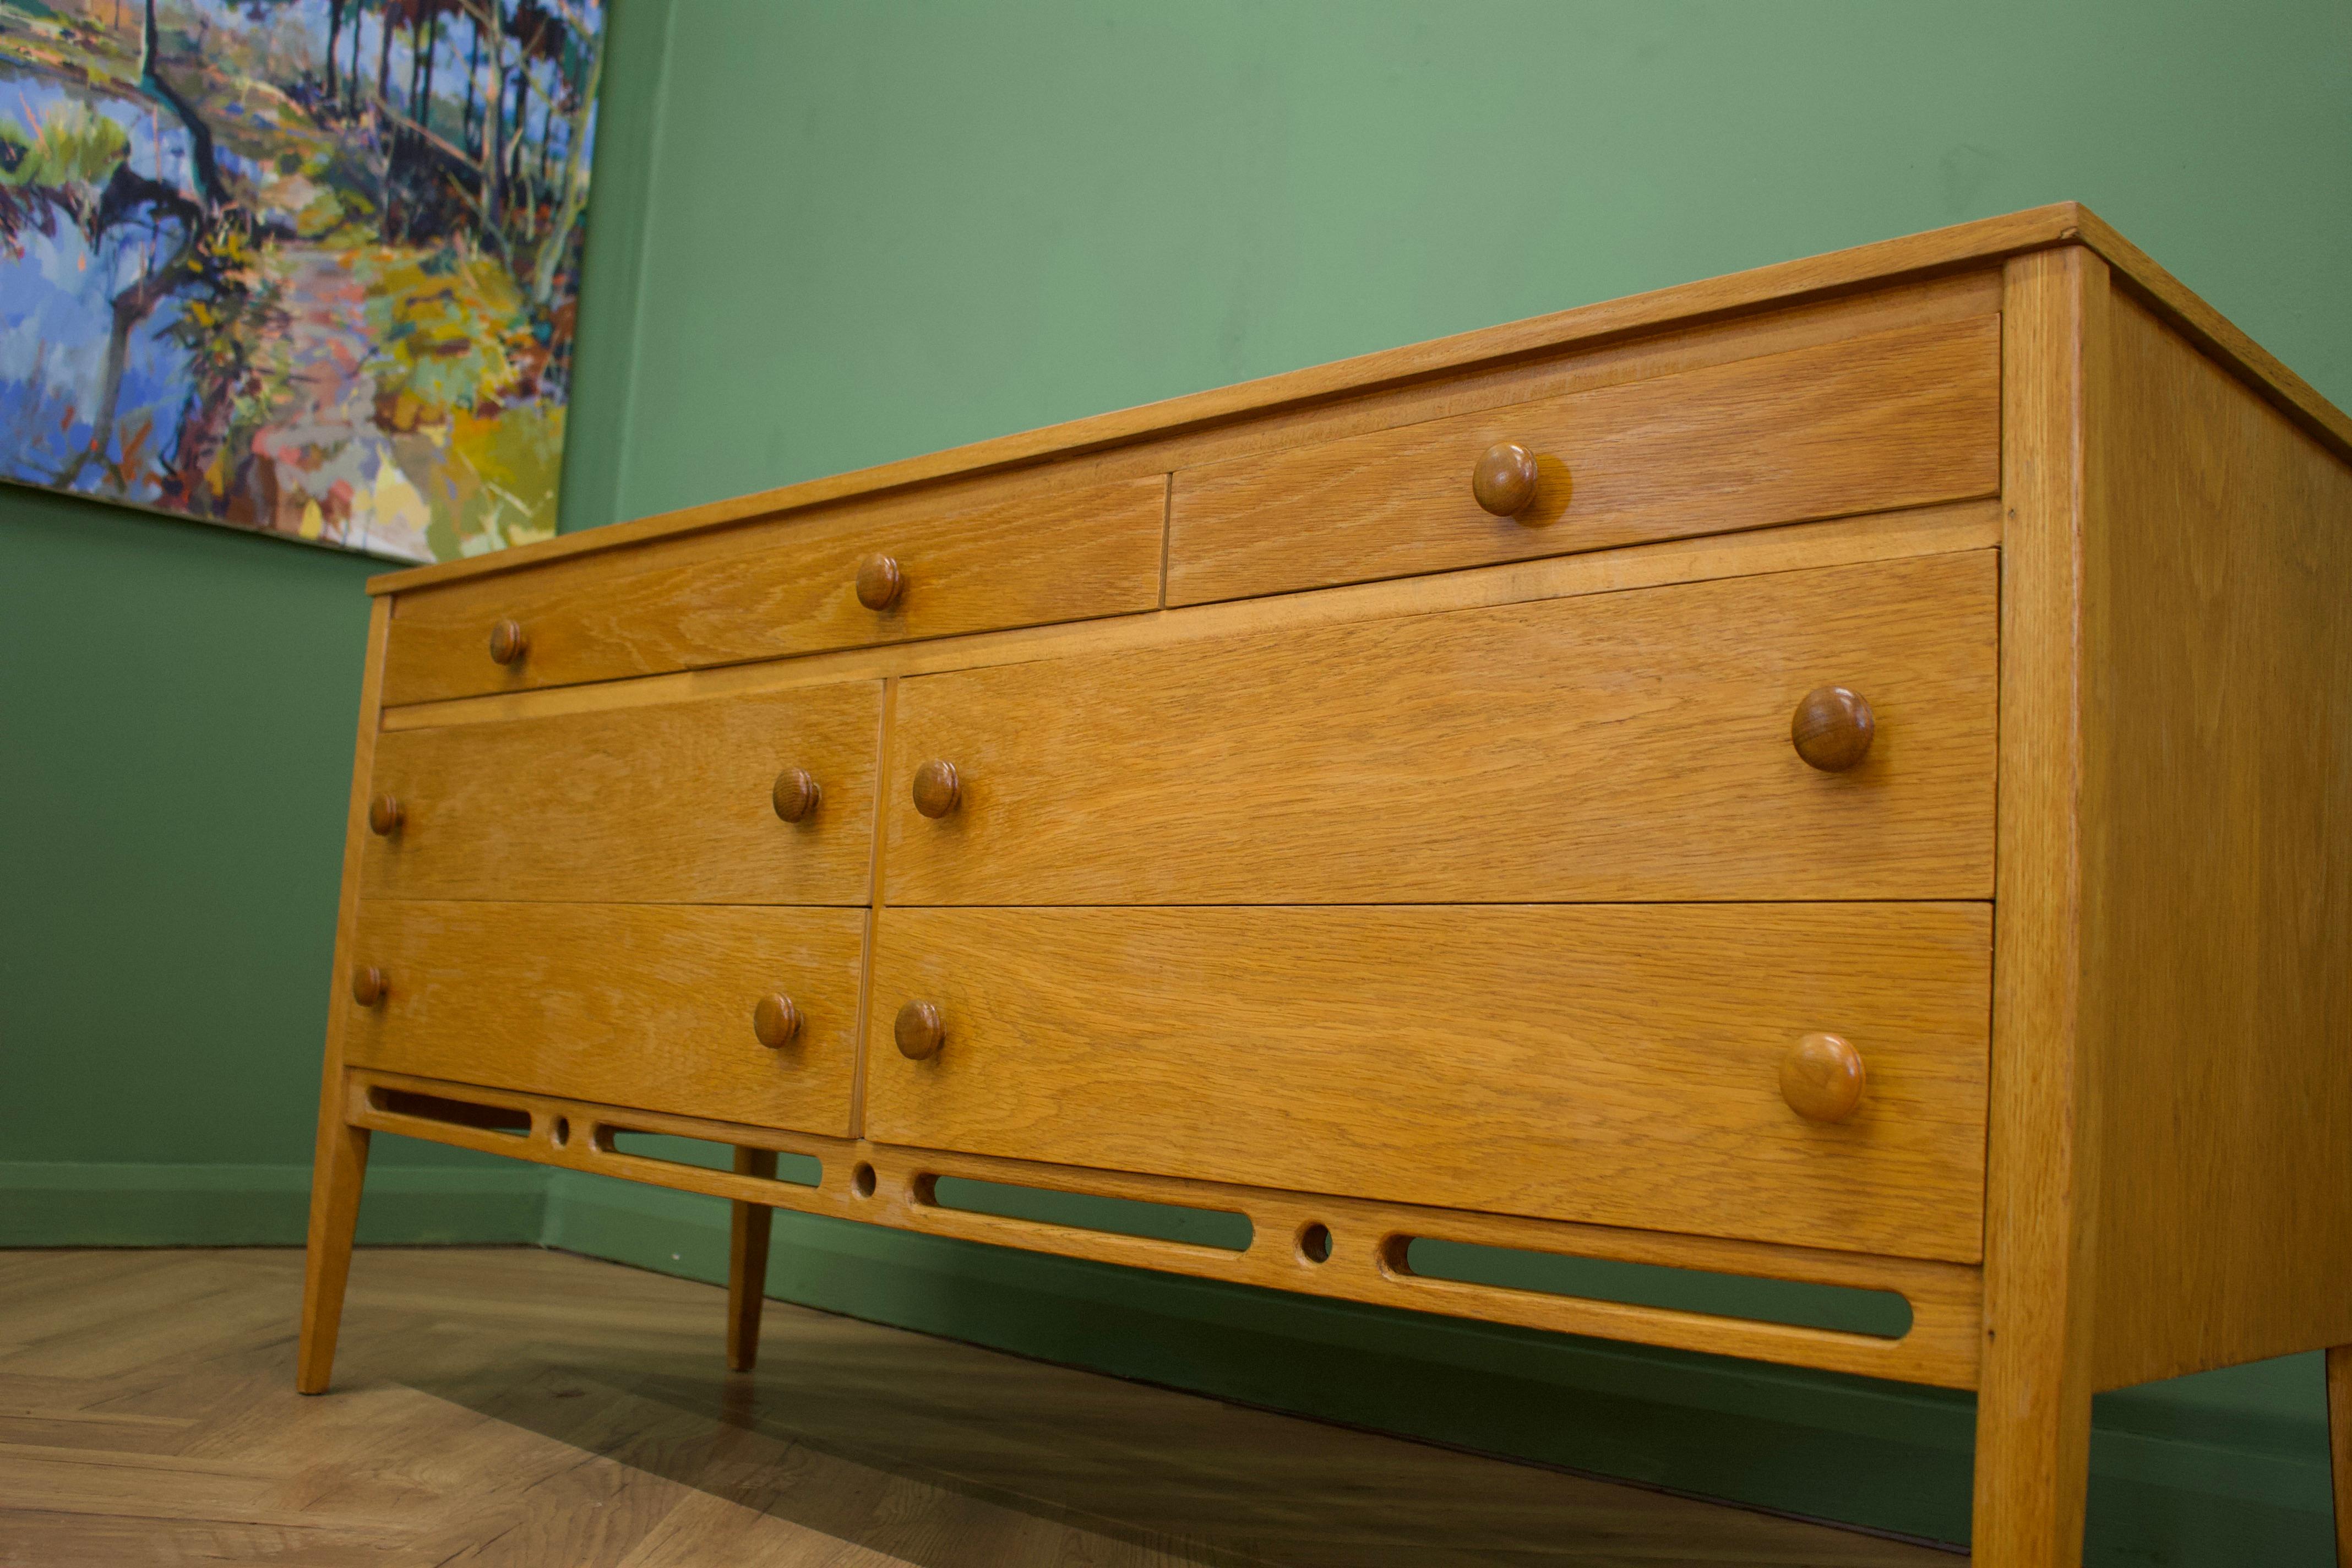 Woodwork Midcentury Oak Dresser or Compact Sideboard by John Herbert for Younger, 1960s